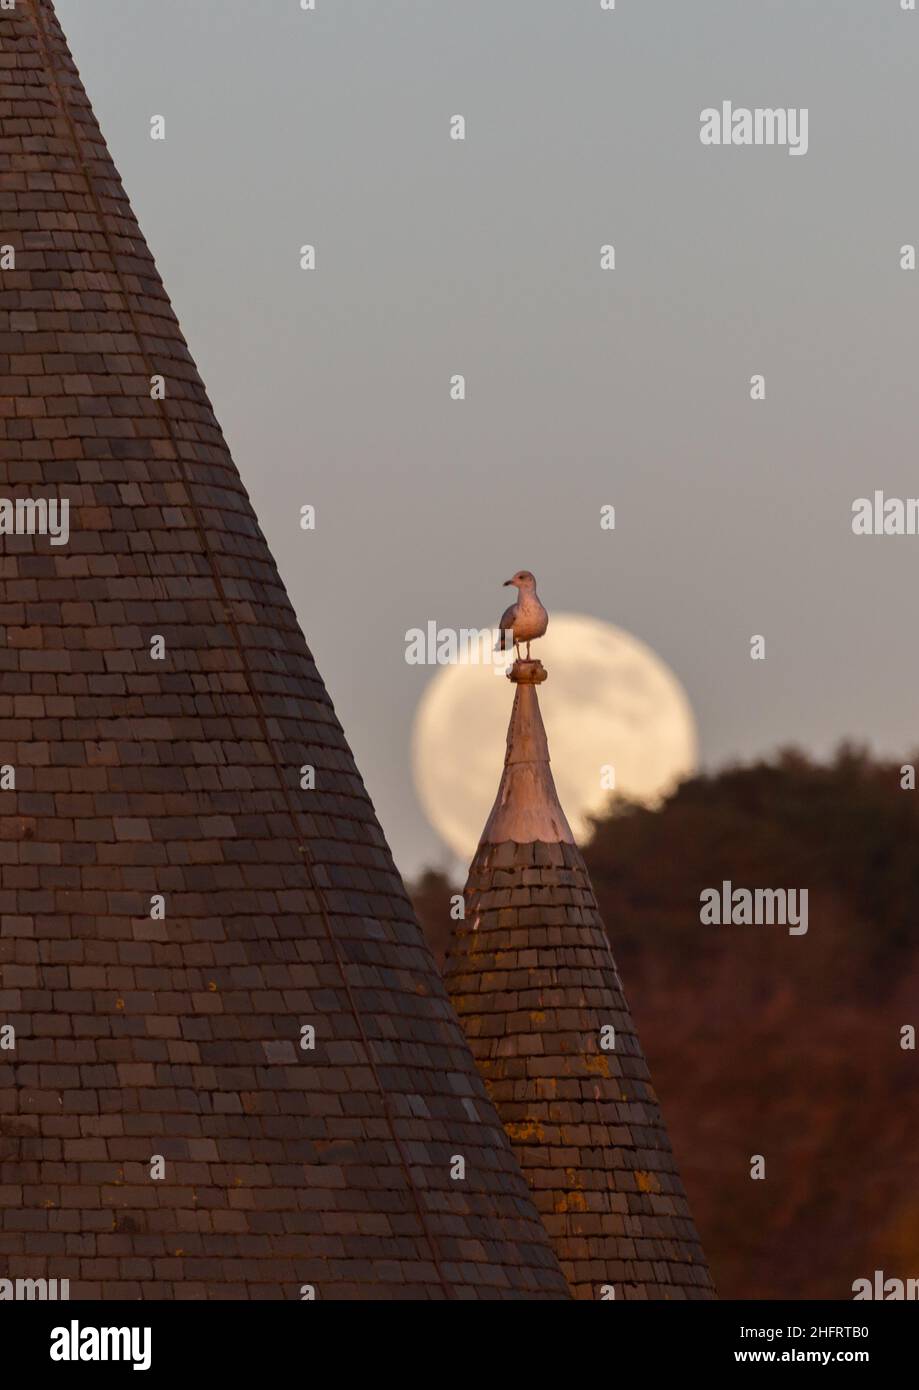 Aberystwyth, Ceredigion, Wales, UK. 17th January 2022  UK Weather: A clear sky for viewing the full wolf moon this evening, as a seagull perches on a spire above the old college in Aberystwyth. Wales. © Ian Jones/Alamy Live News Stock Photo